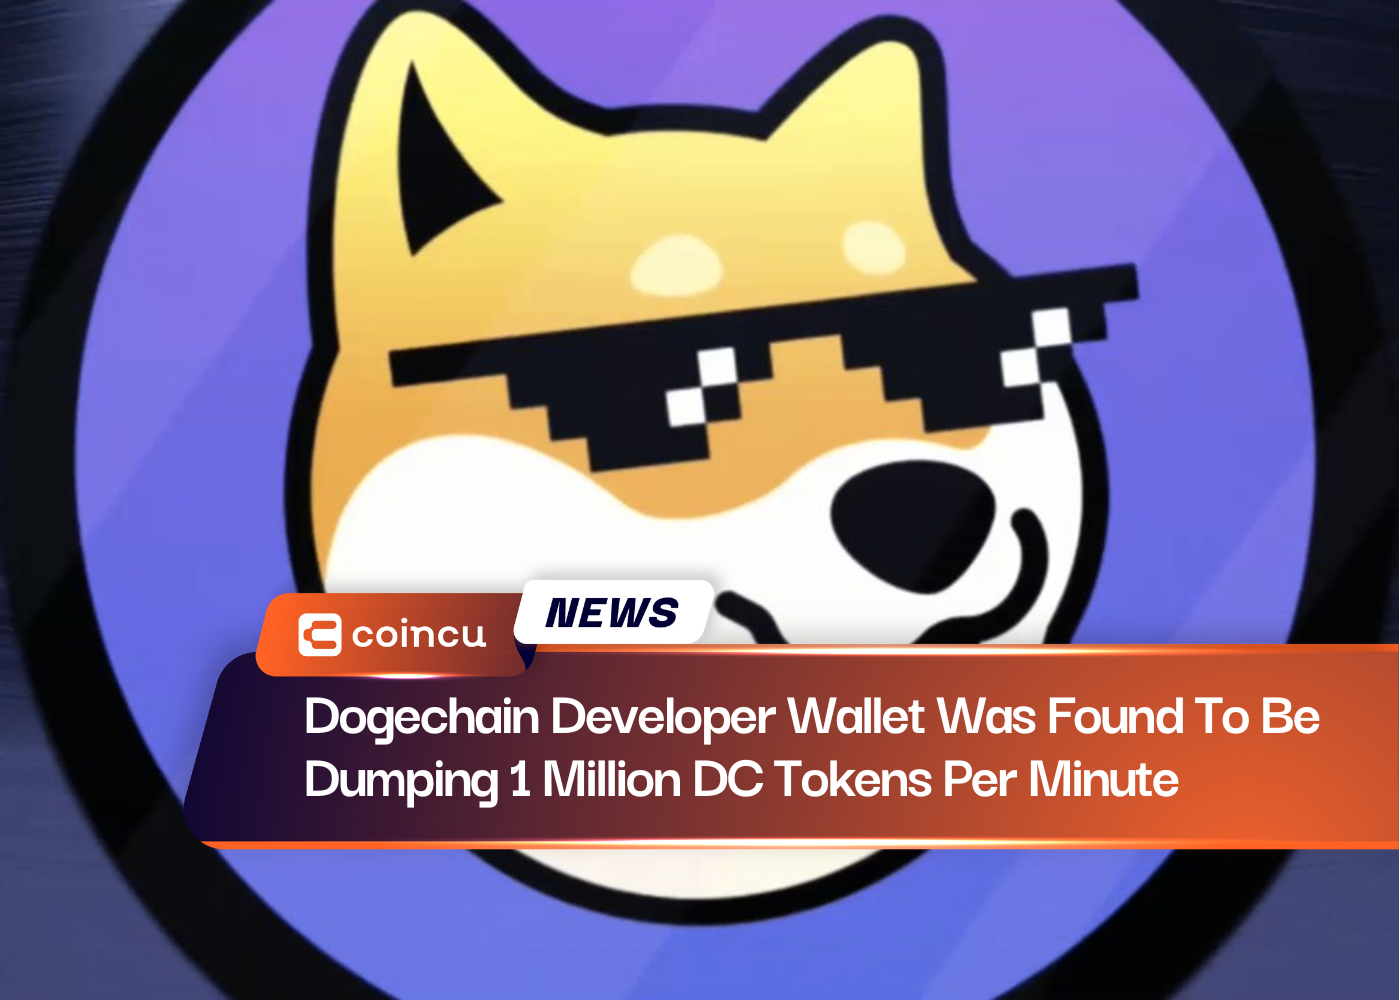 Dogechain Developer Wallet Was Found To Be Dumping 1 Million DC Tokens Per Minute